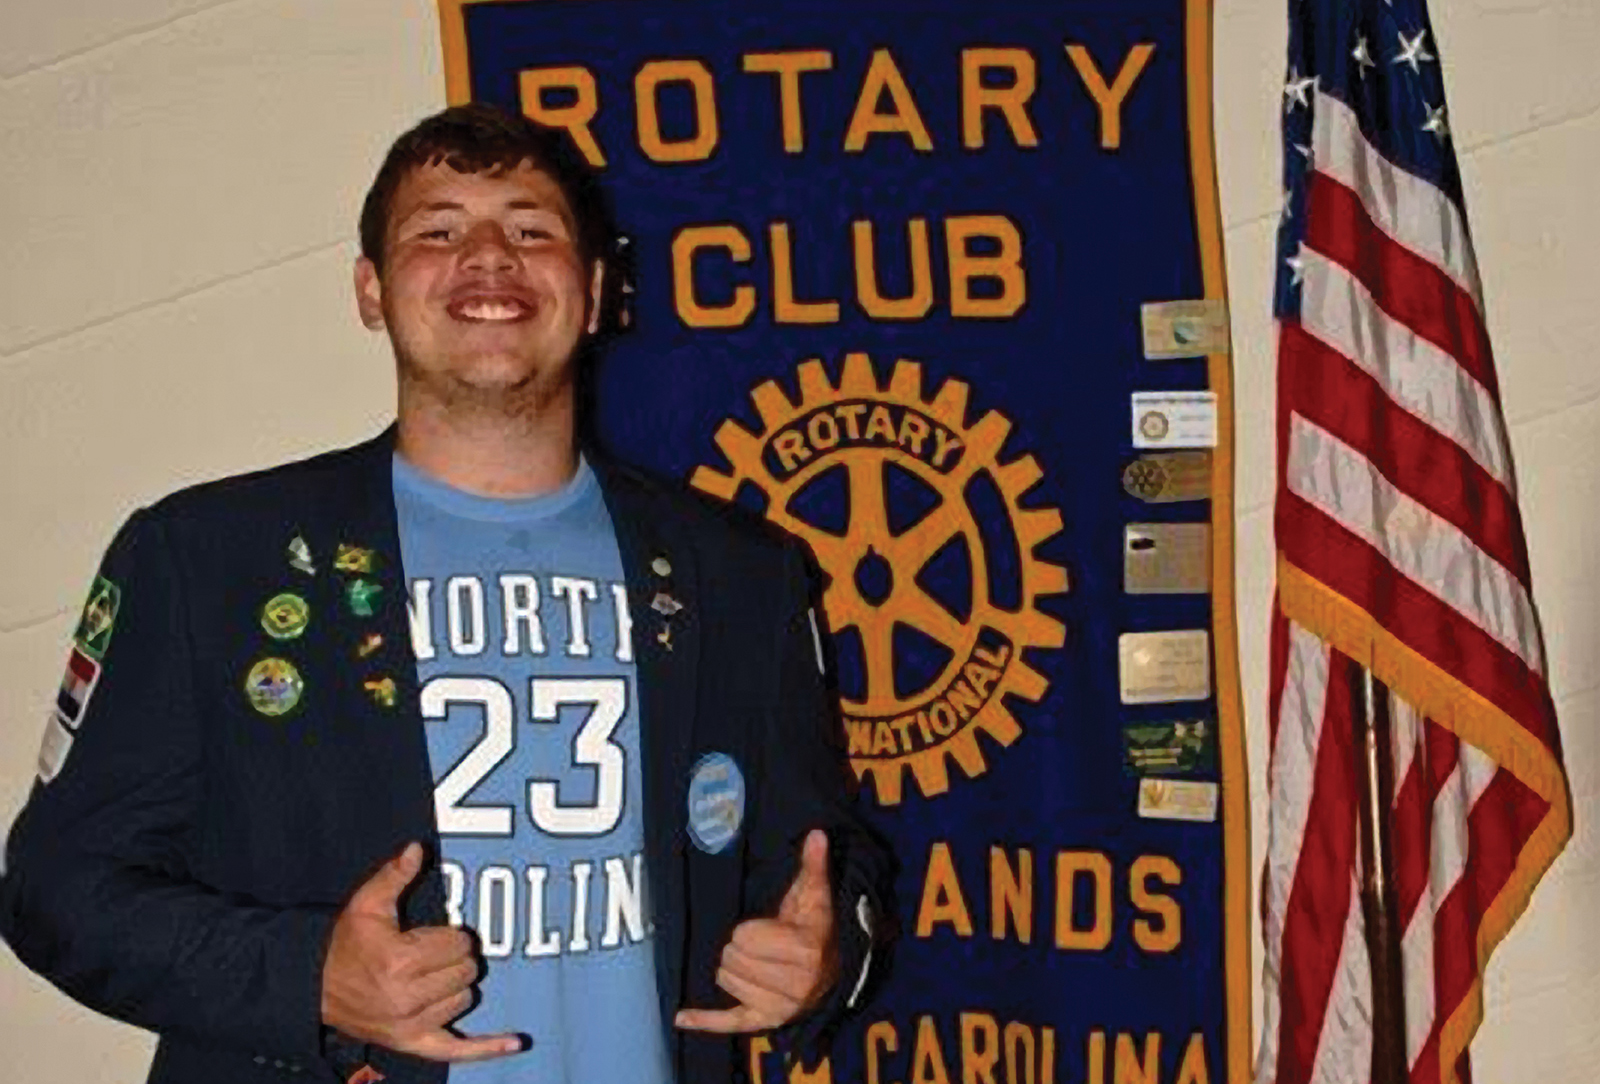 Rotary-club-highlands-Exchange-Student-nc